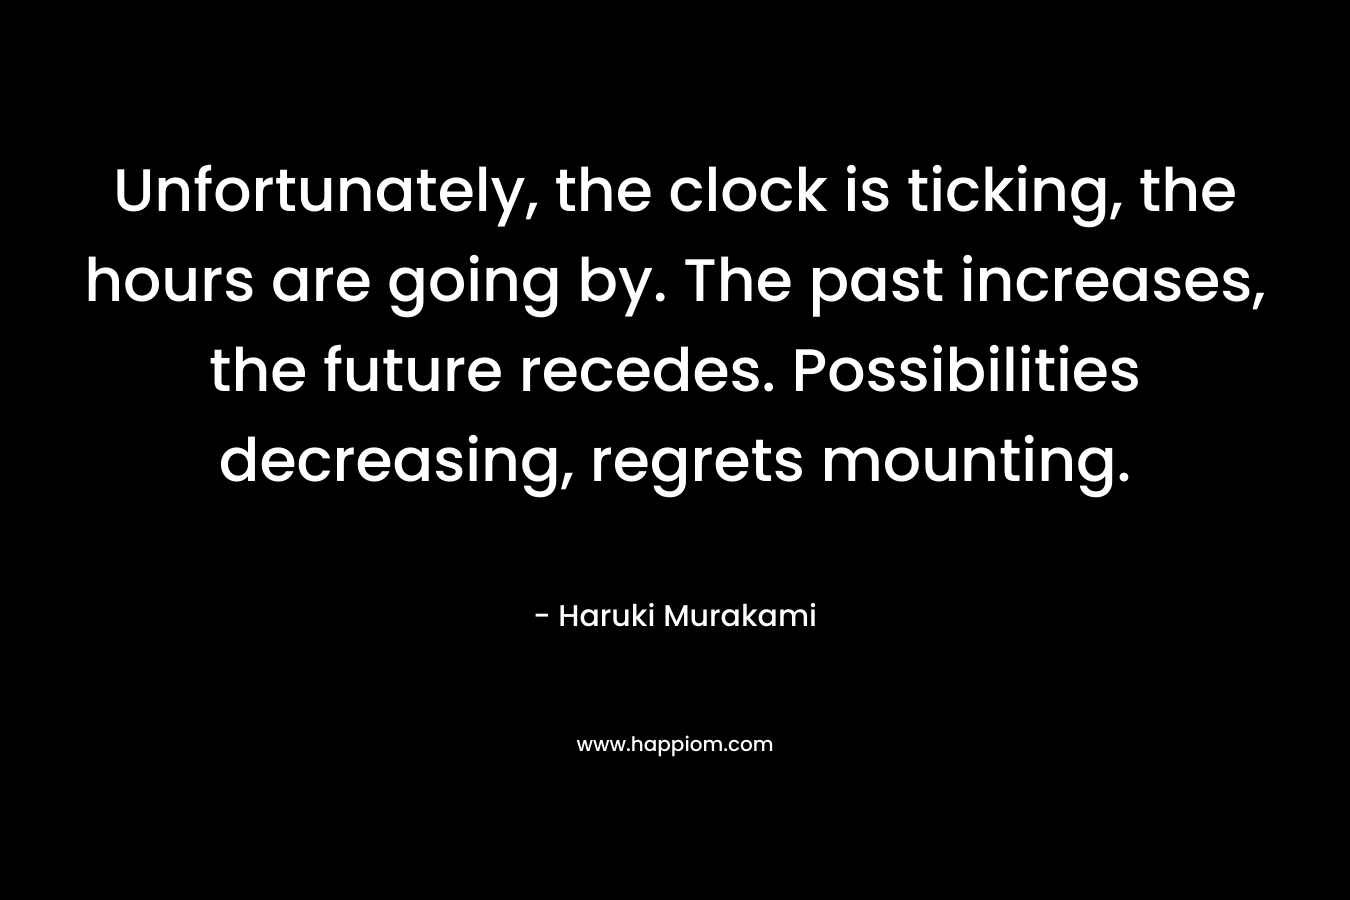 Unfortunately, the clock is ticking, the hours are going by. The past increases, the future recedes. Possibilities decreasing, regrets mounting. – Haruki Murakami